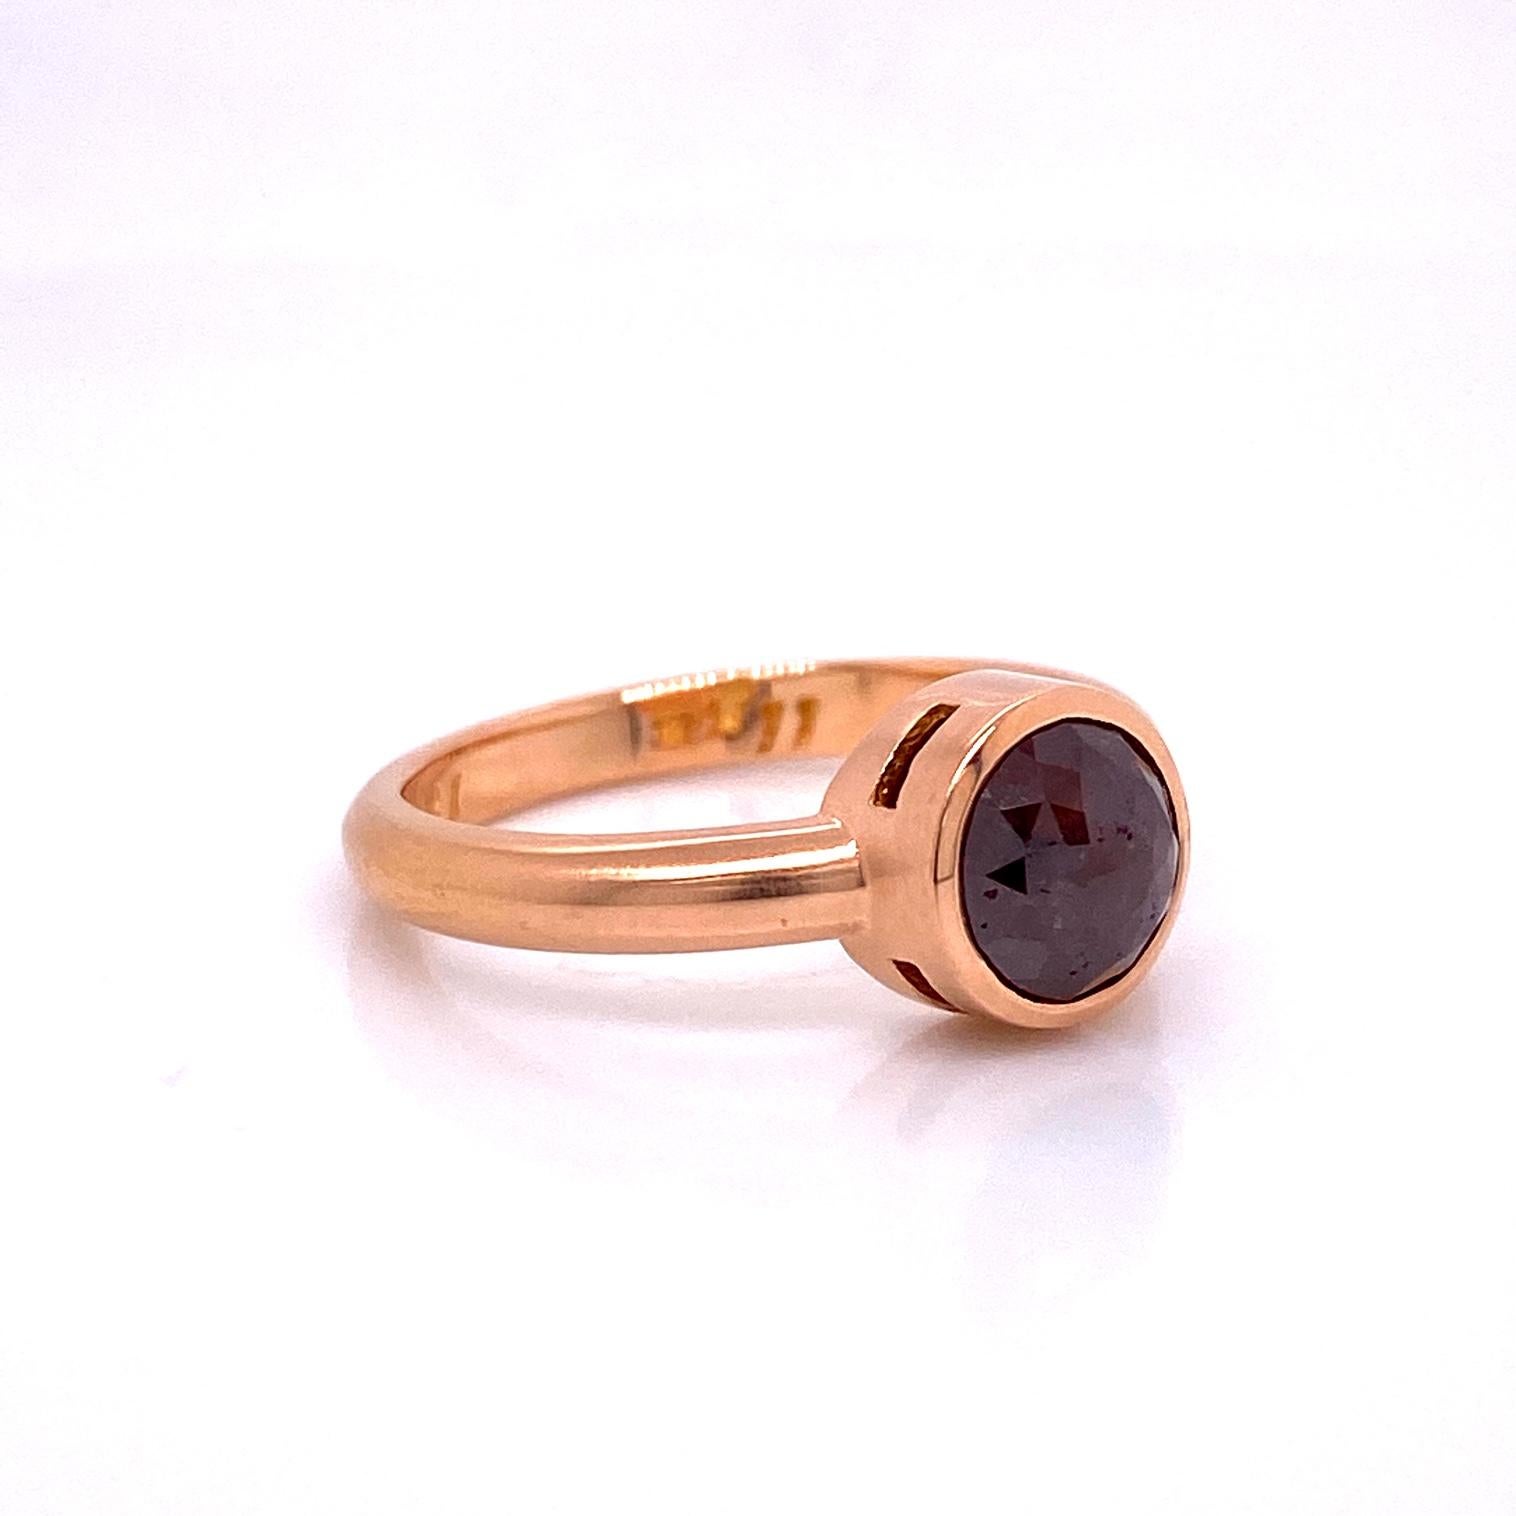 An 18k rose gold ring bezel set with a 3.12 carat round red brown rose cut diamond with a brushed finish. Ring size 7. Designed and made by llyn strong.